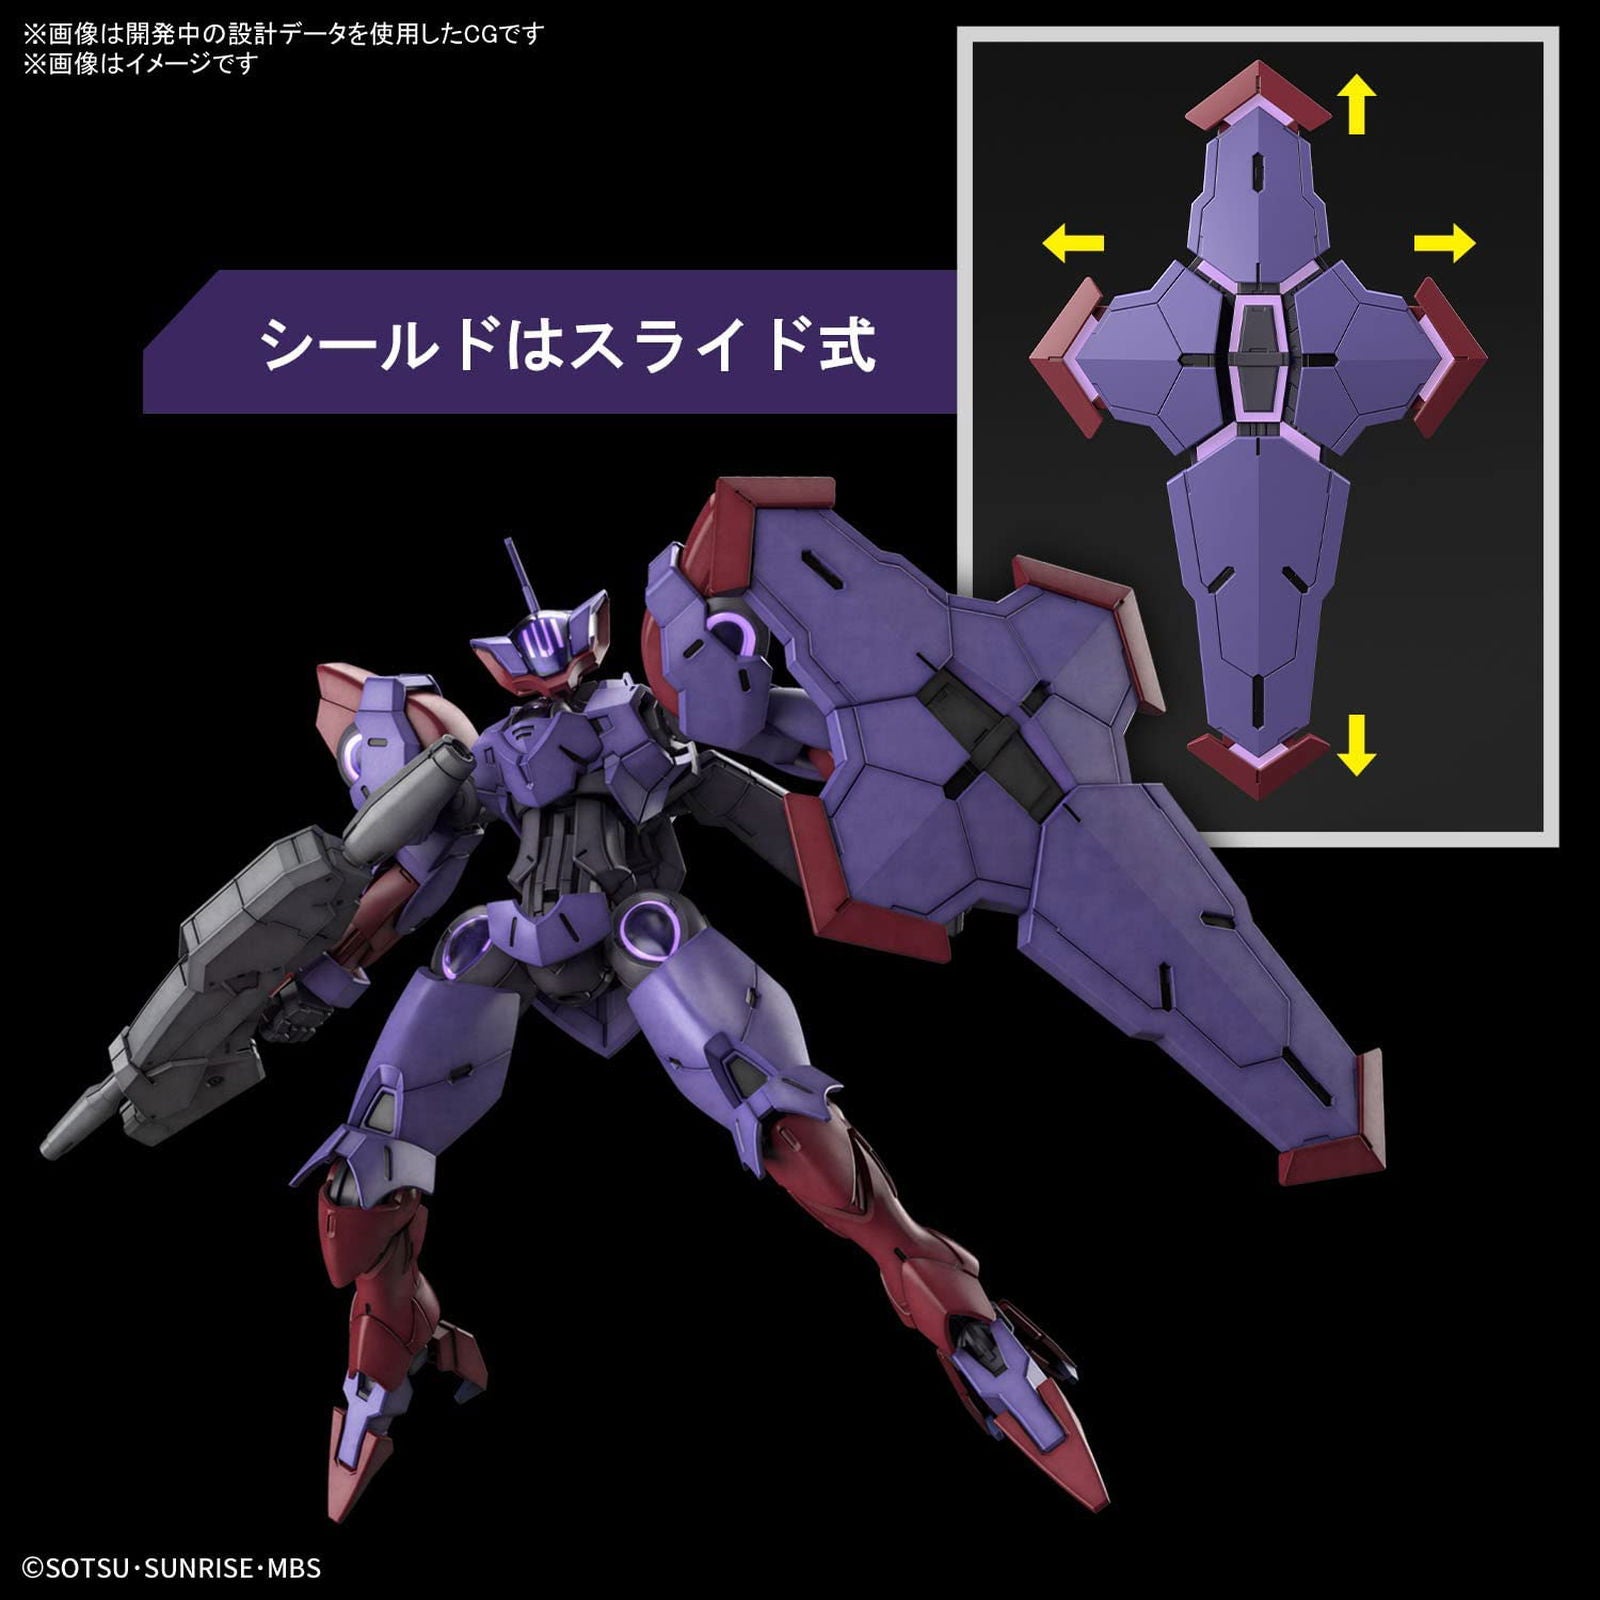 Bandai 1/144 HG Beguir-Pente (Mobile Suit Gundam: The Witch from Mercur - BanzaiHobby